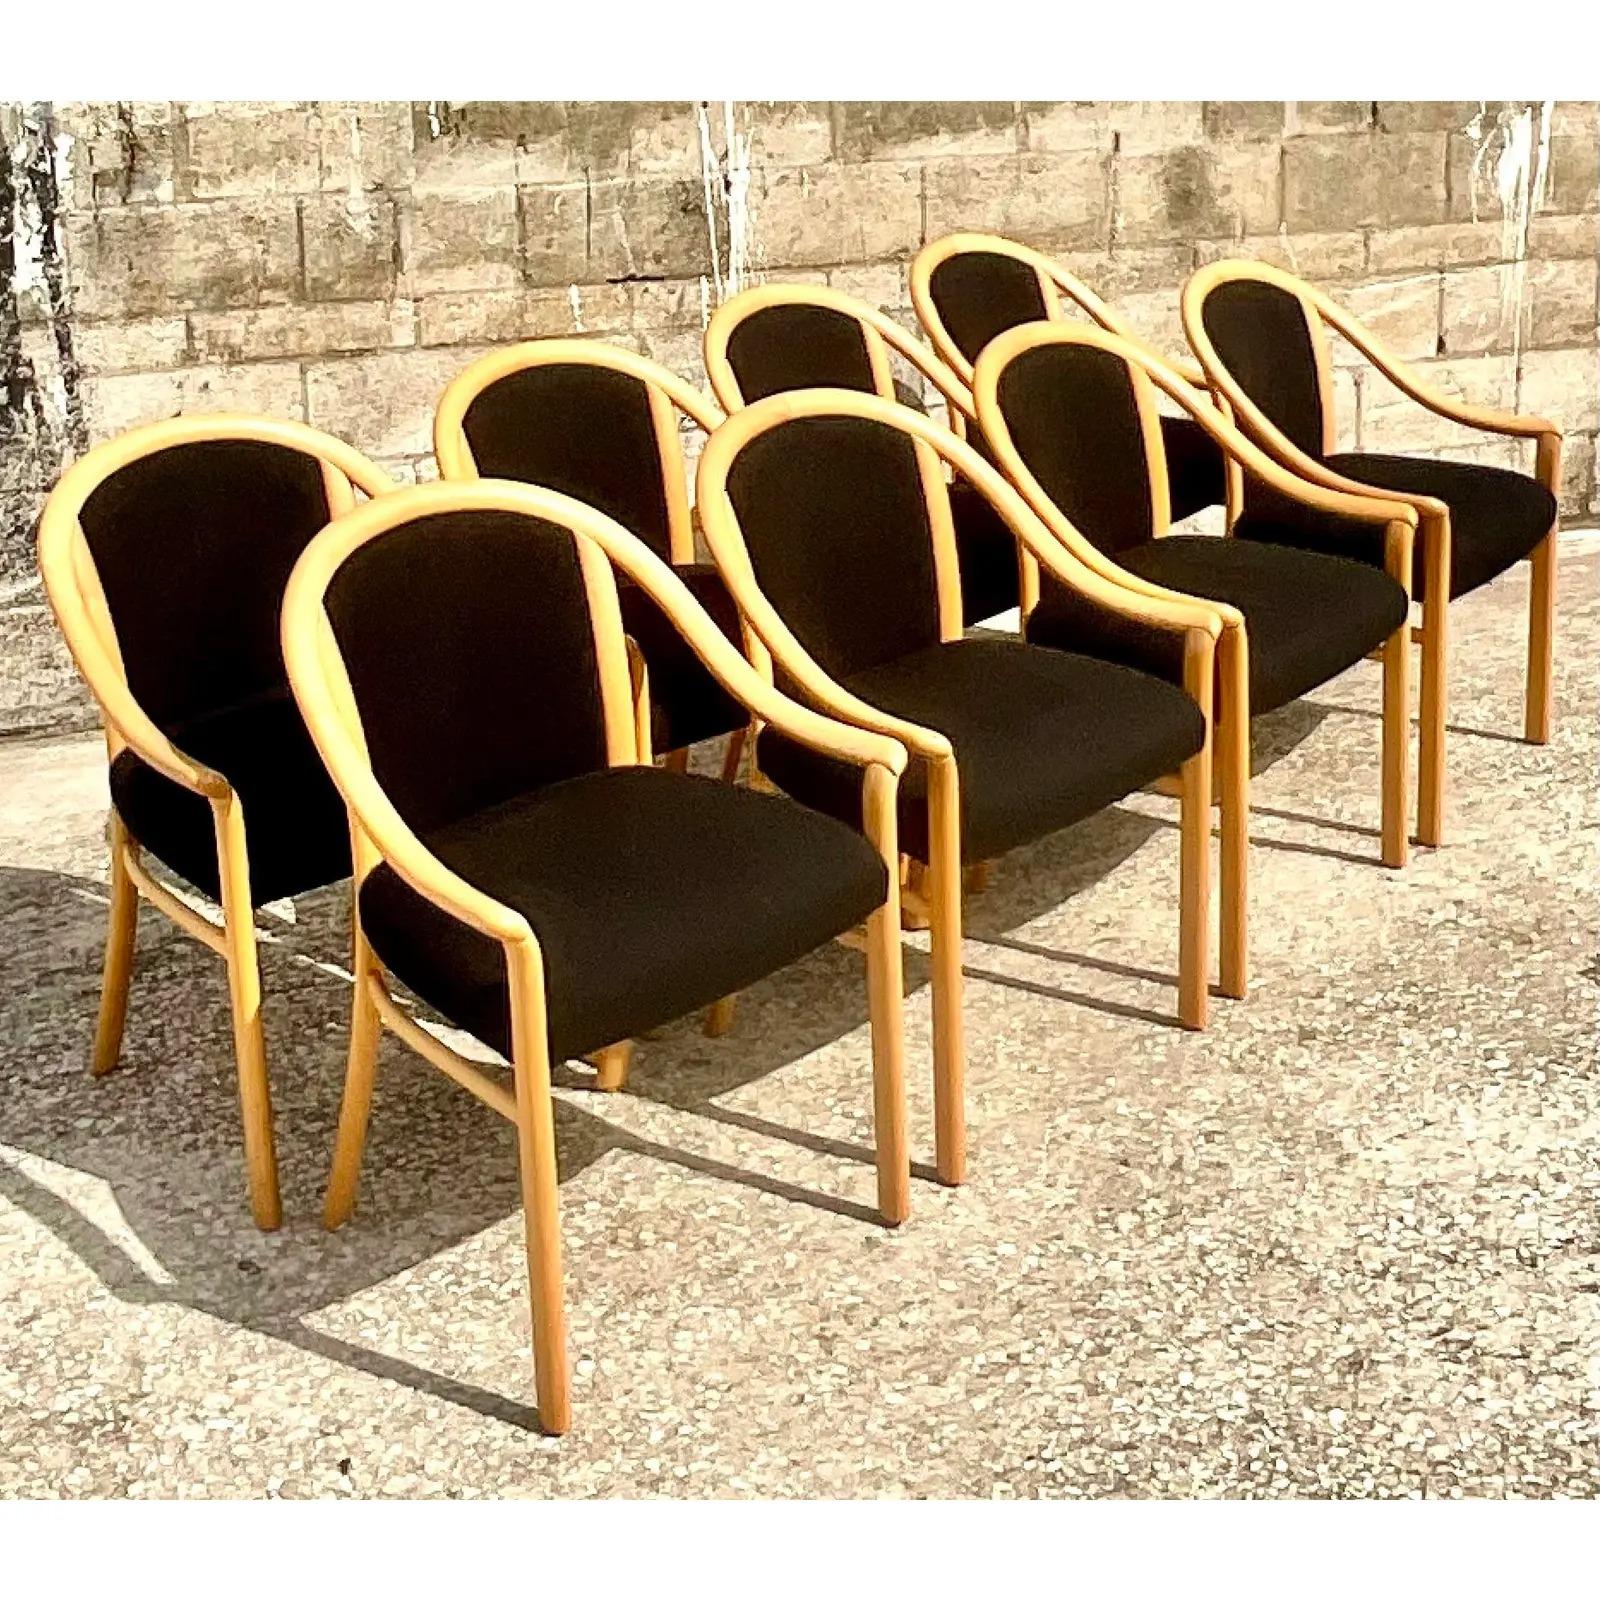 Fantastic set of vintage MCM dining chairs. Made by the iconic Stendig company. Beautiful blonde wood with a black tweed upholstered seat. Chic and simple design. Acquired from a Palm Beach estate.